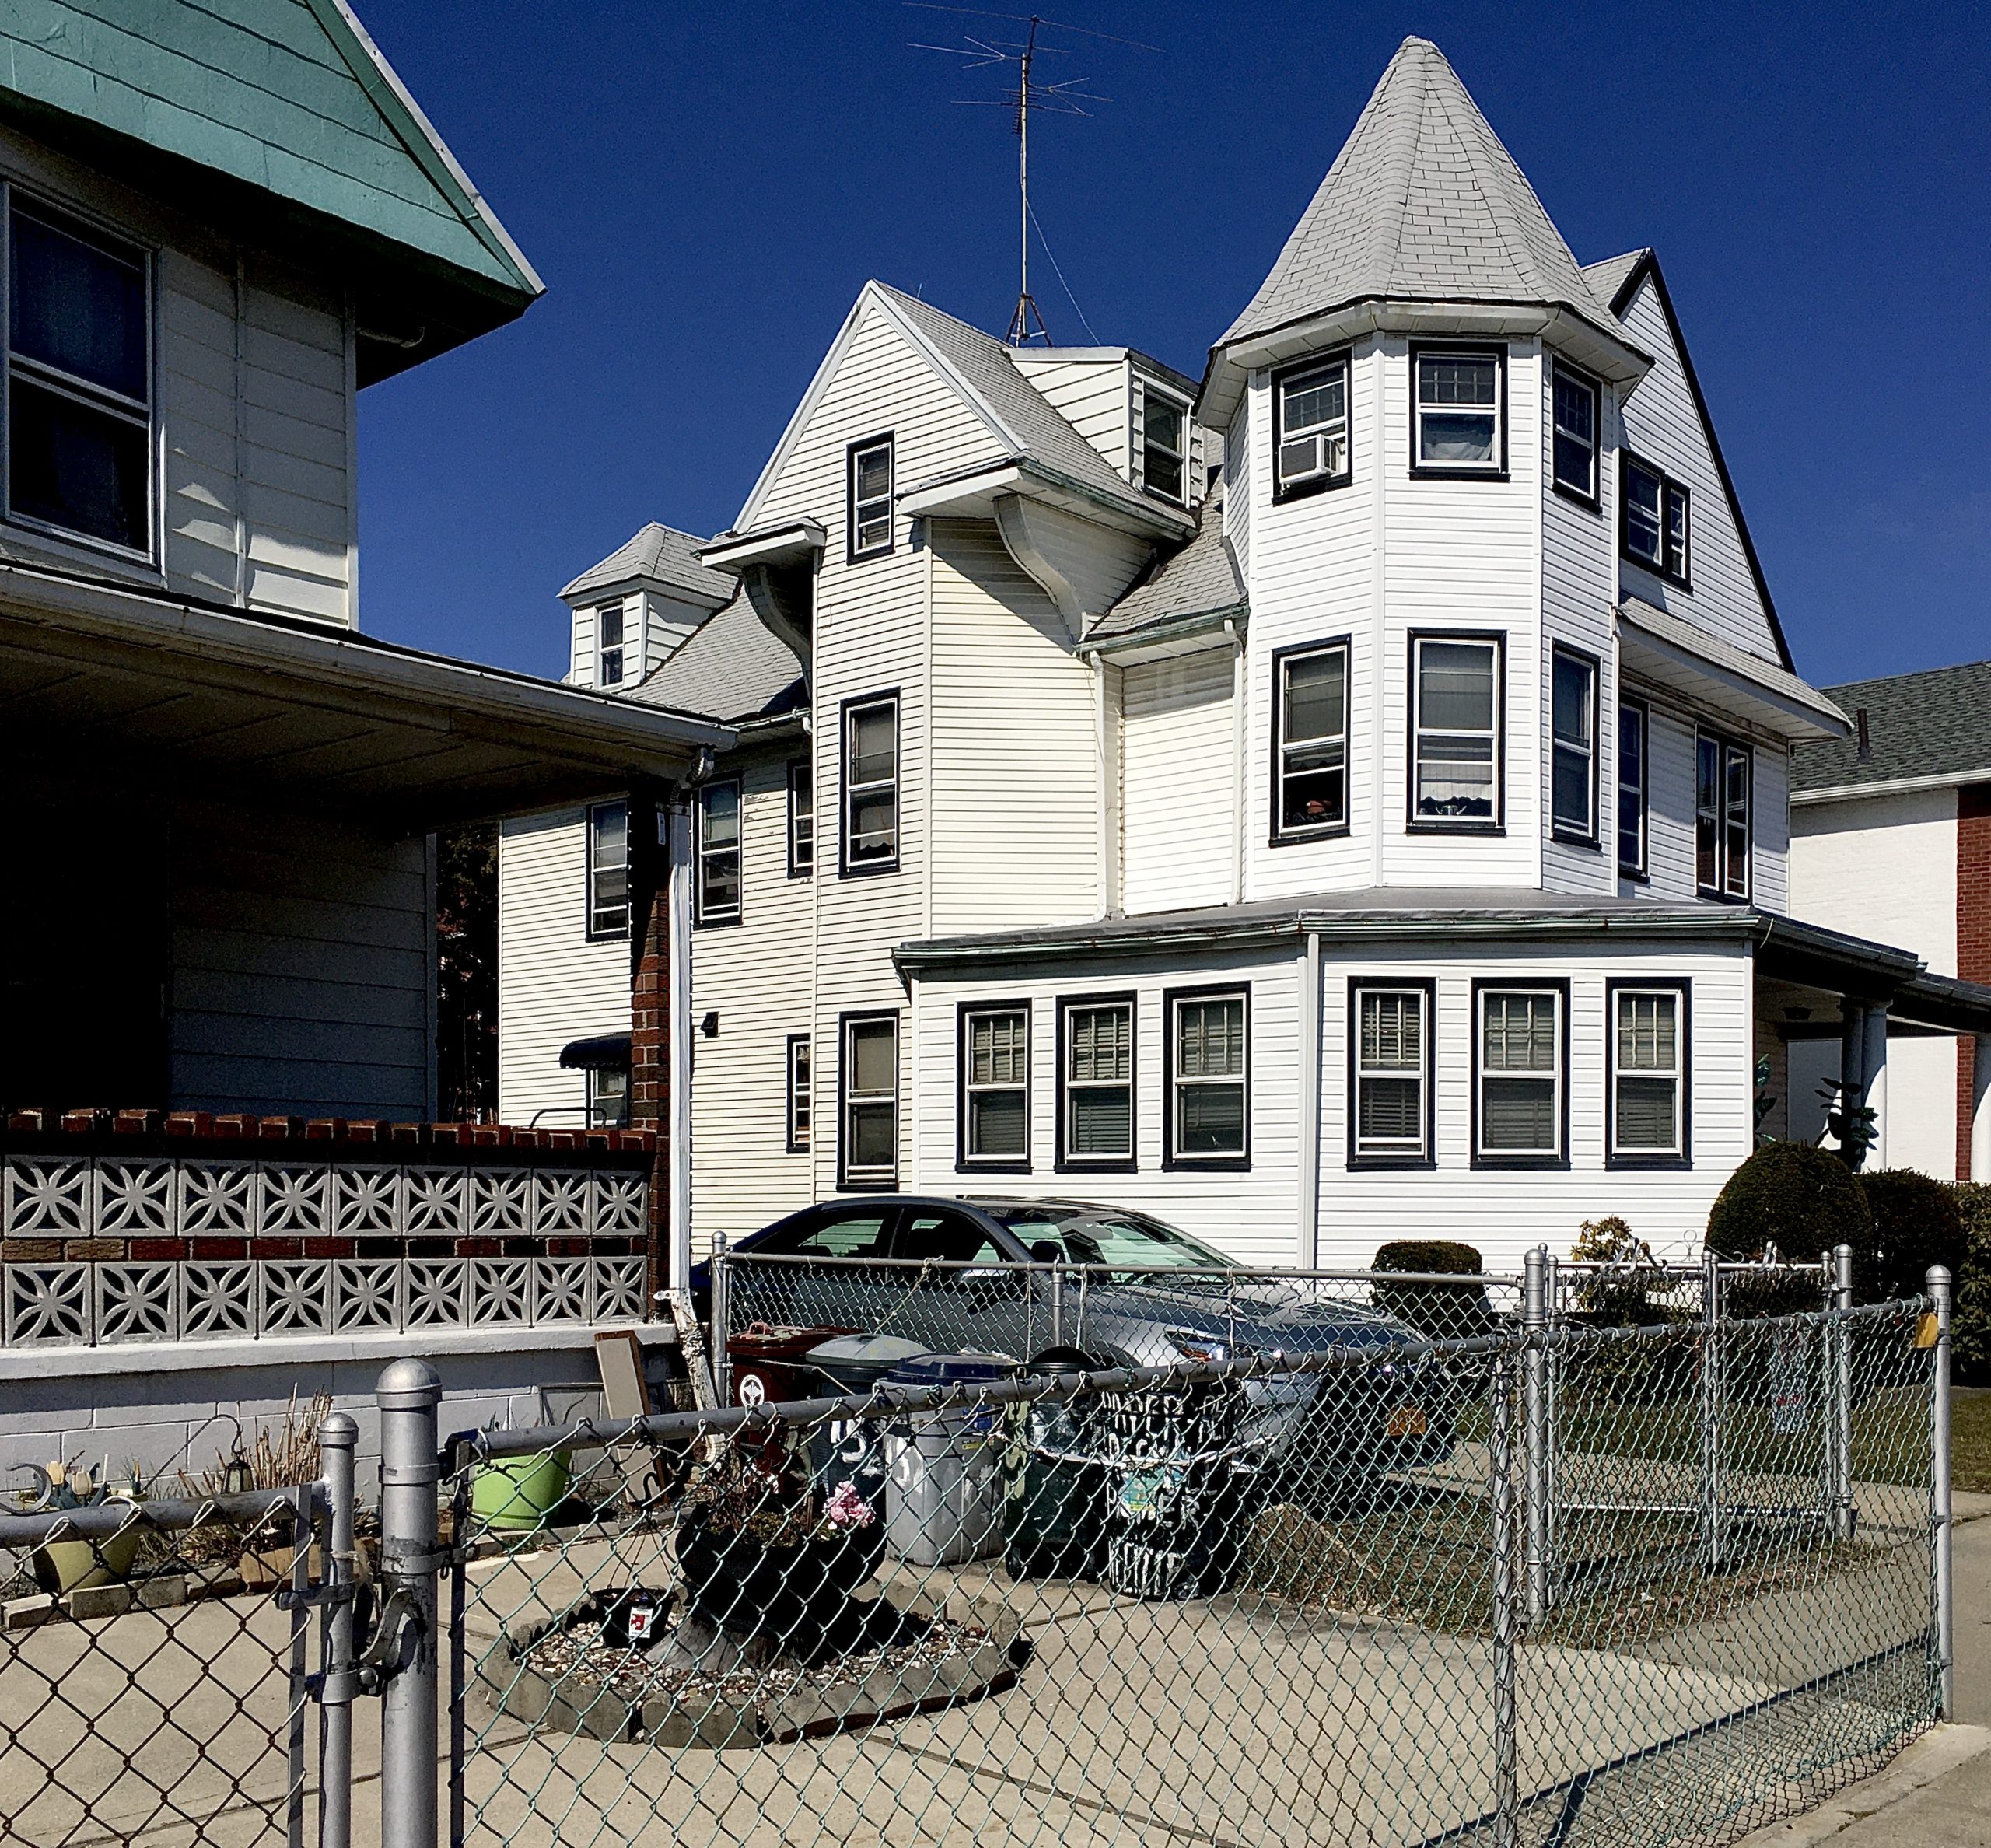 This lovely Victorian House can be found on Bay 28th Street in Bath Beach. Photo: Lore Croghan/Brooklyn Eagle